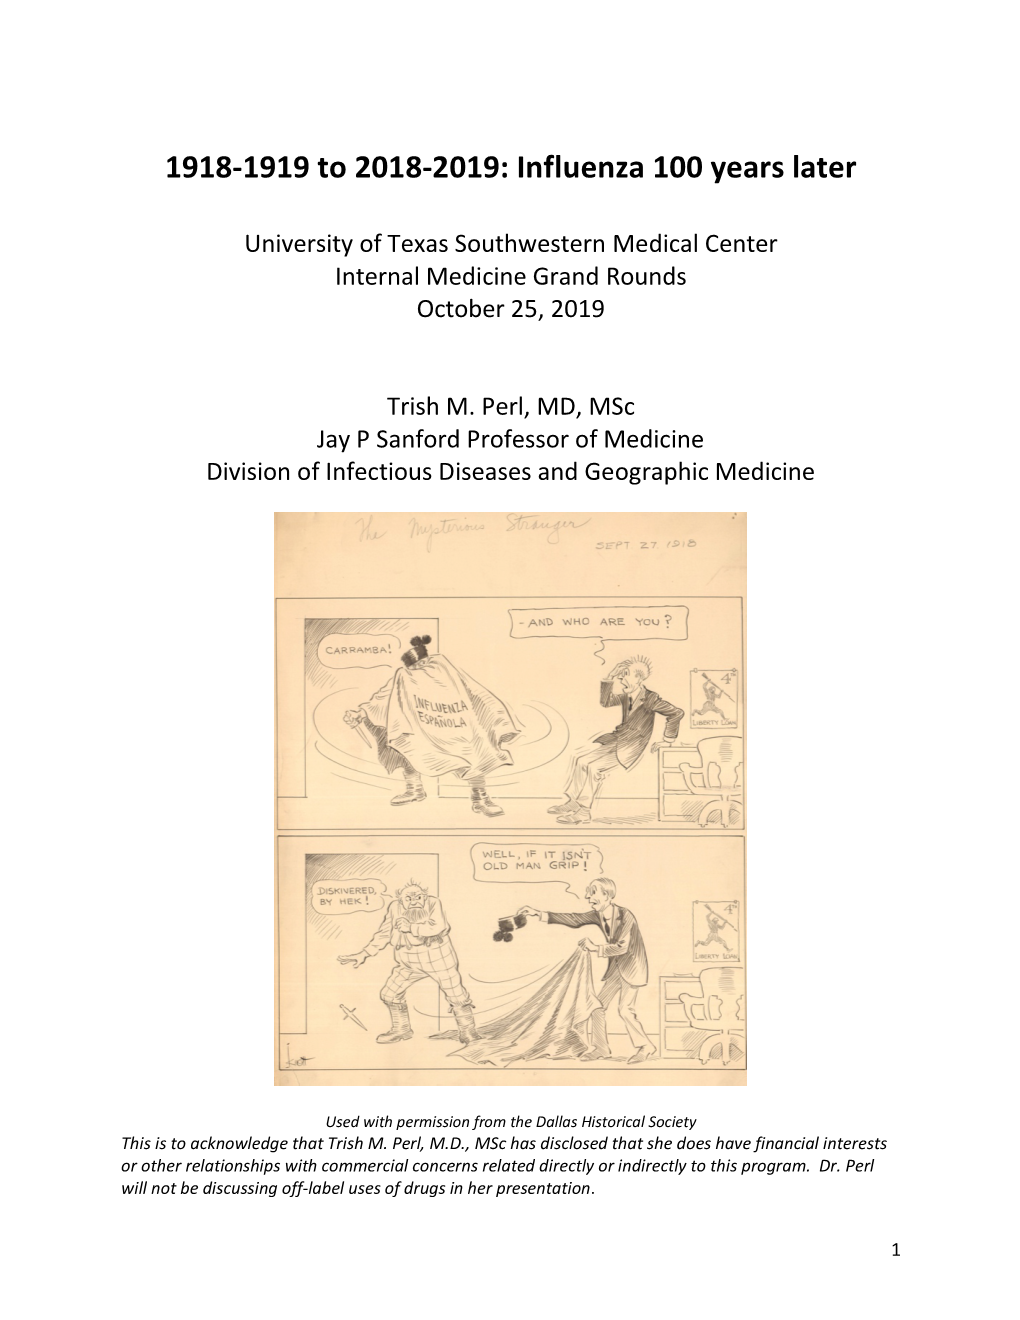 1918-1919 to 2018-2019: Influenza 100 Years Later